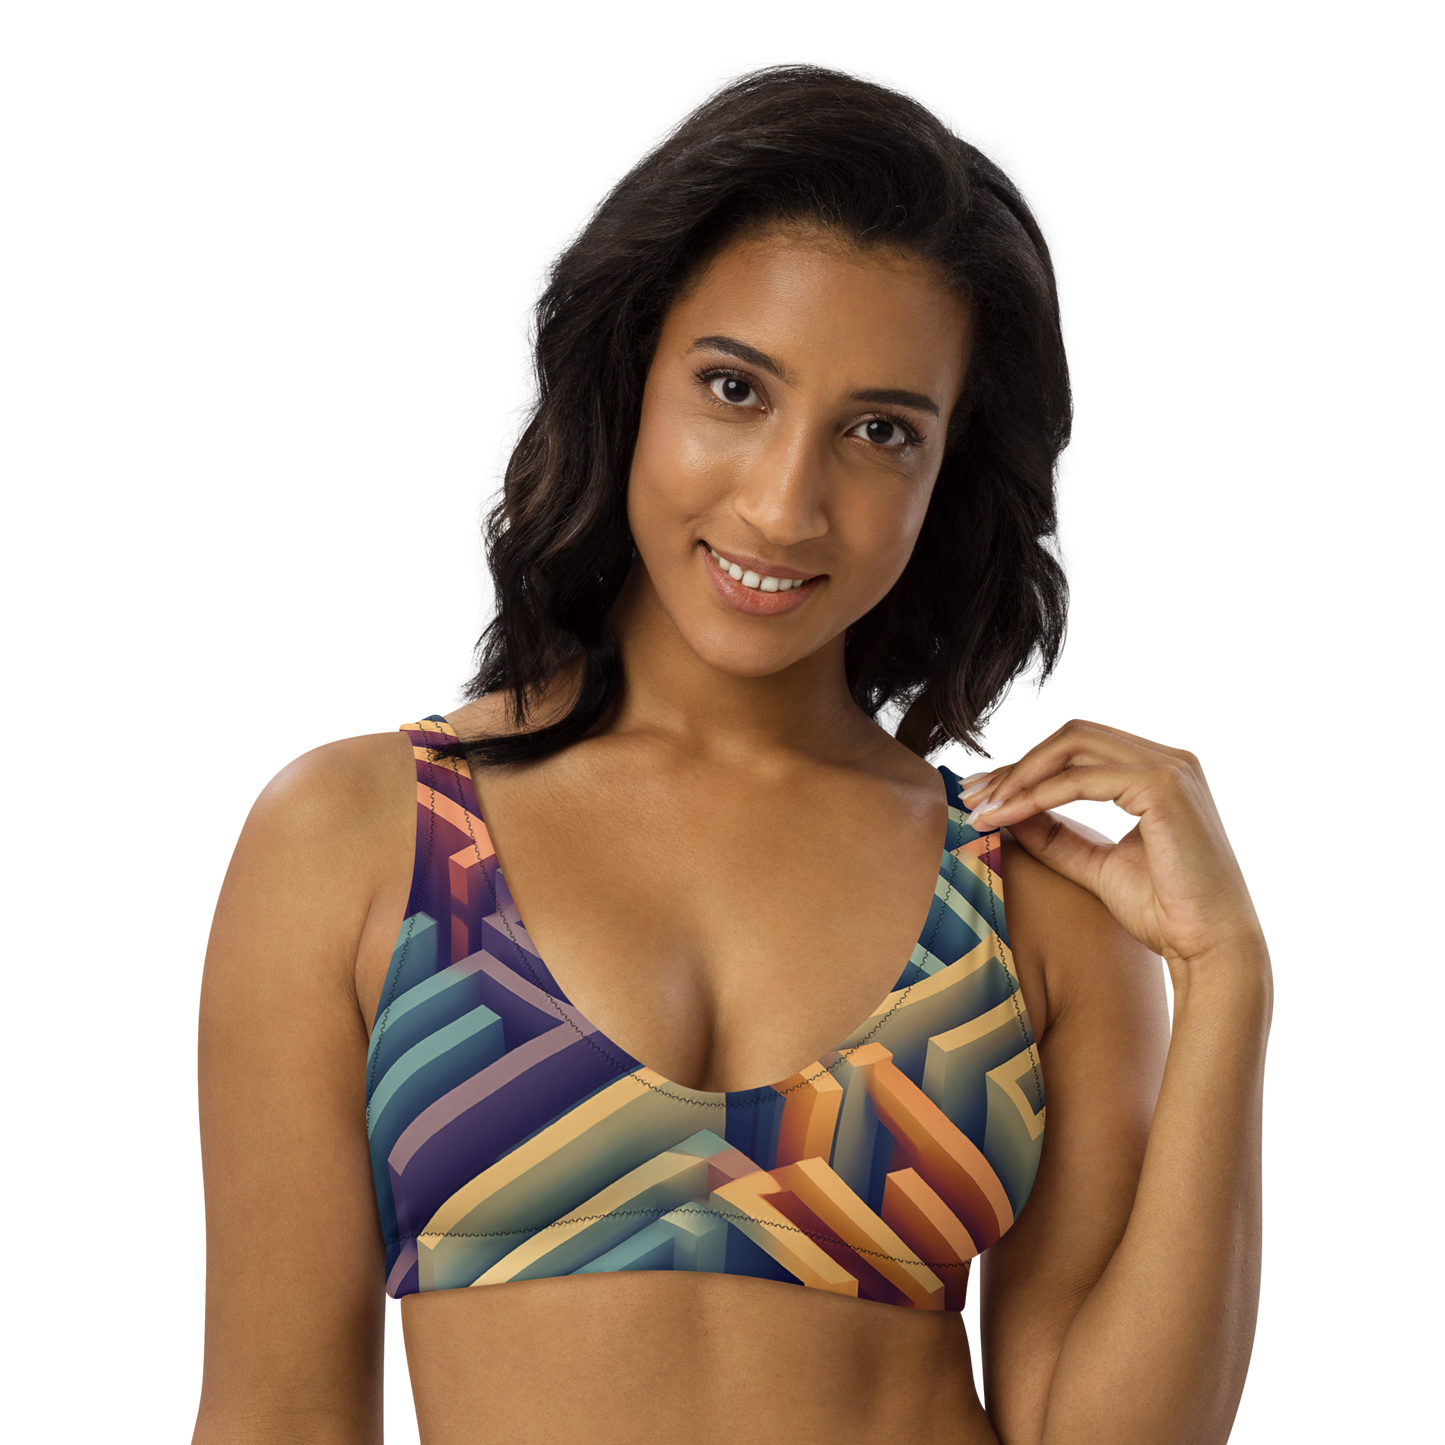 3D Maze Illusion | 3D Patterns | All-Over Print Recycled Padded Bikini Top - #3